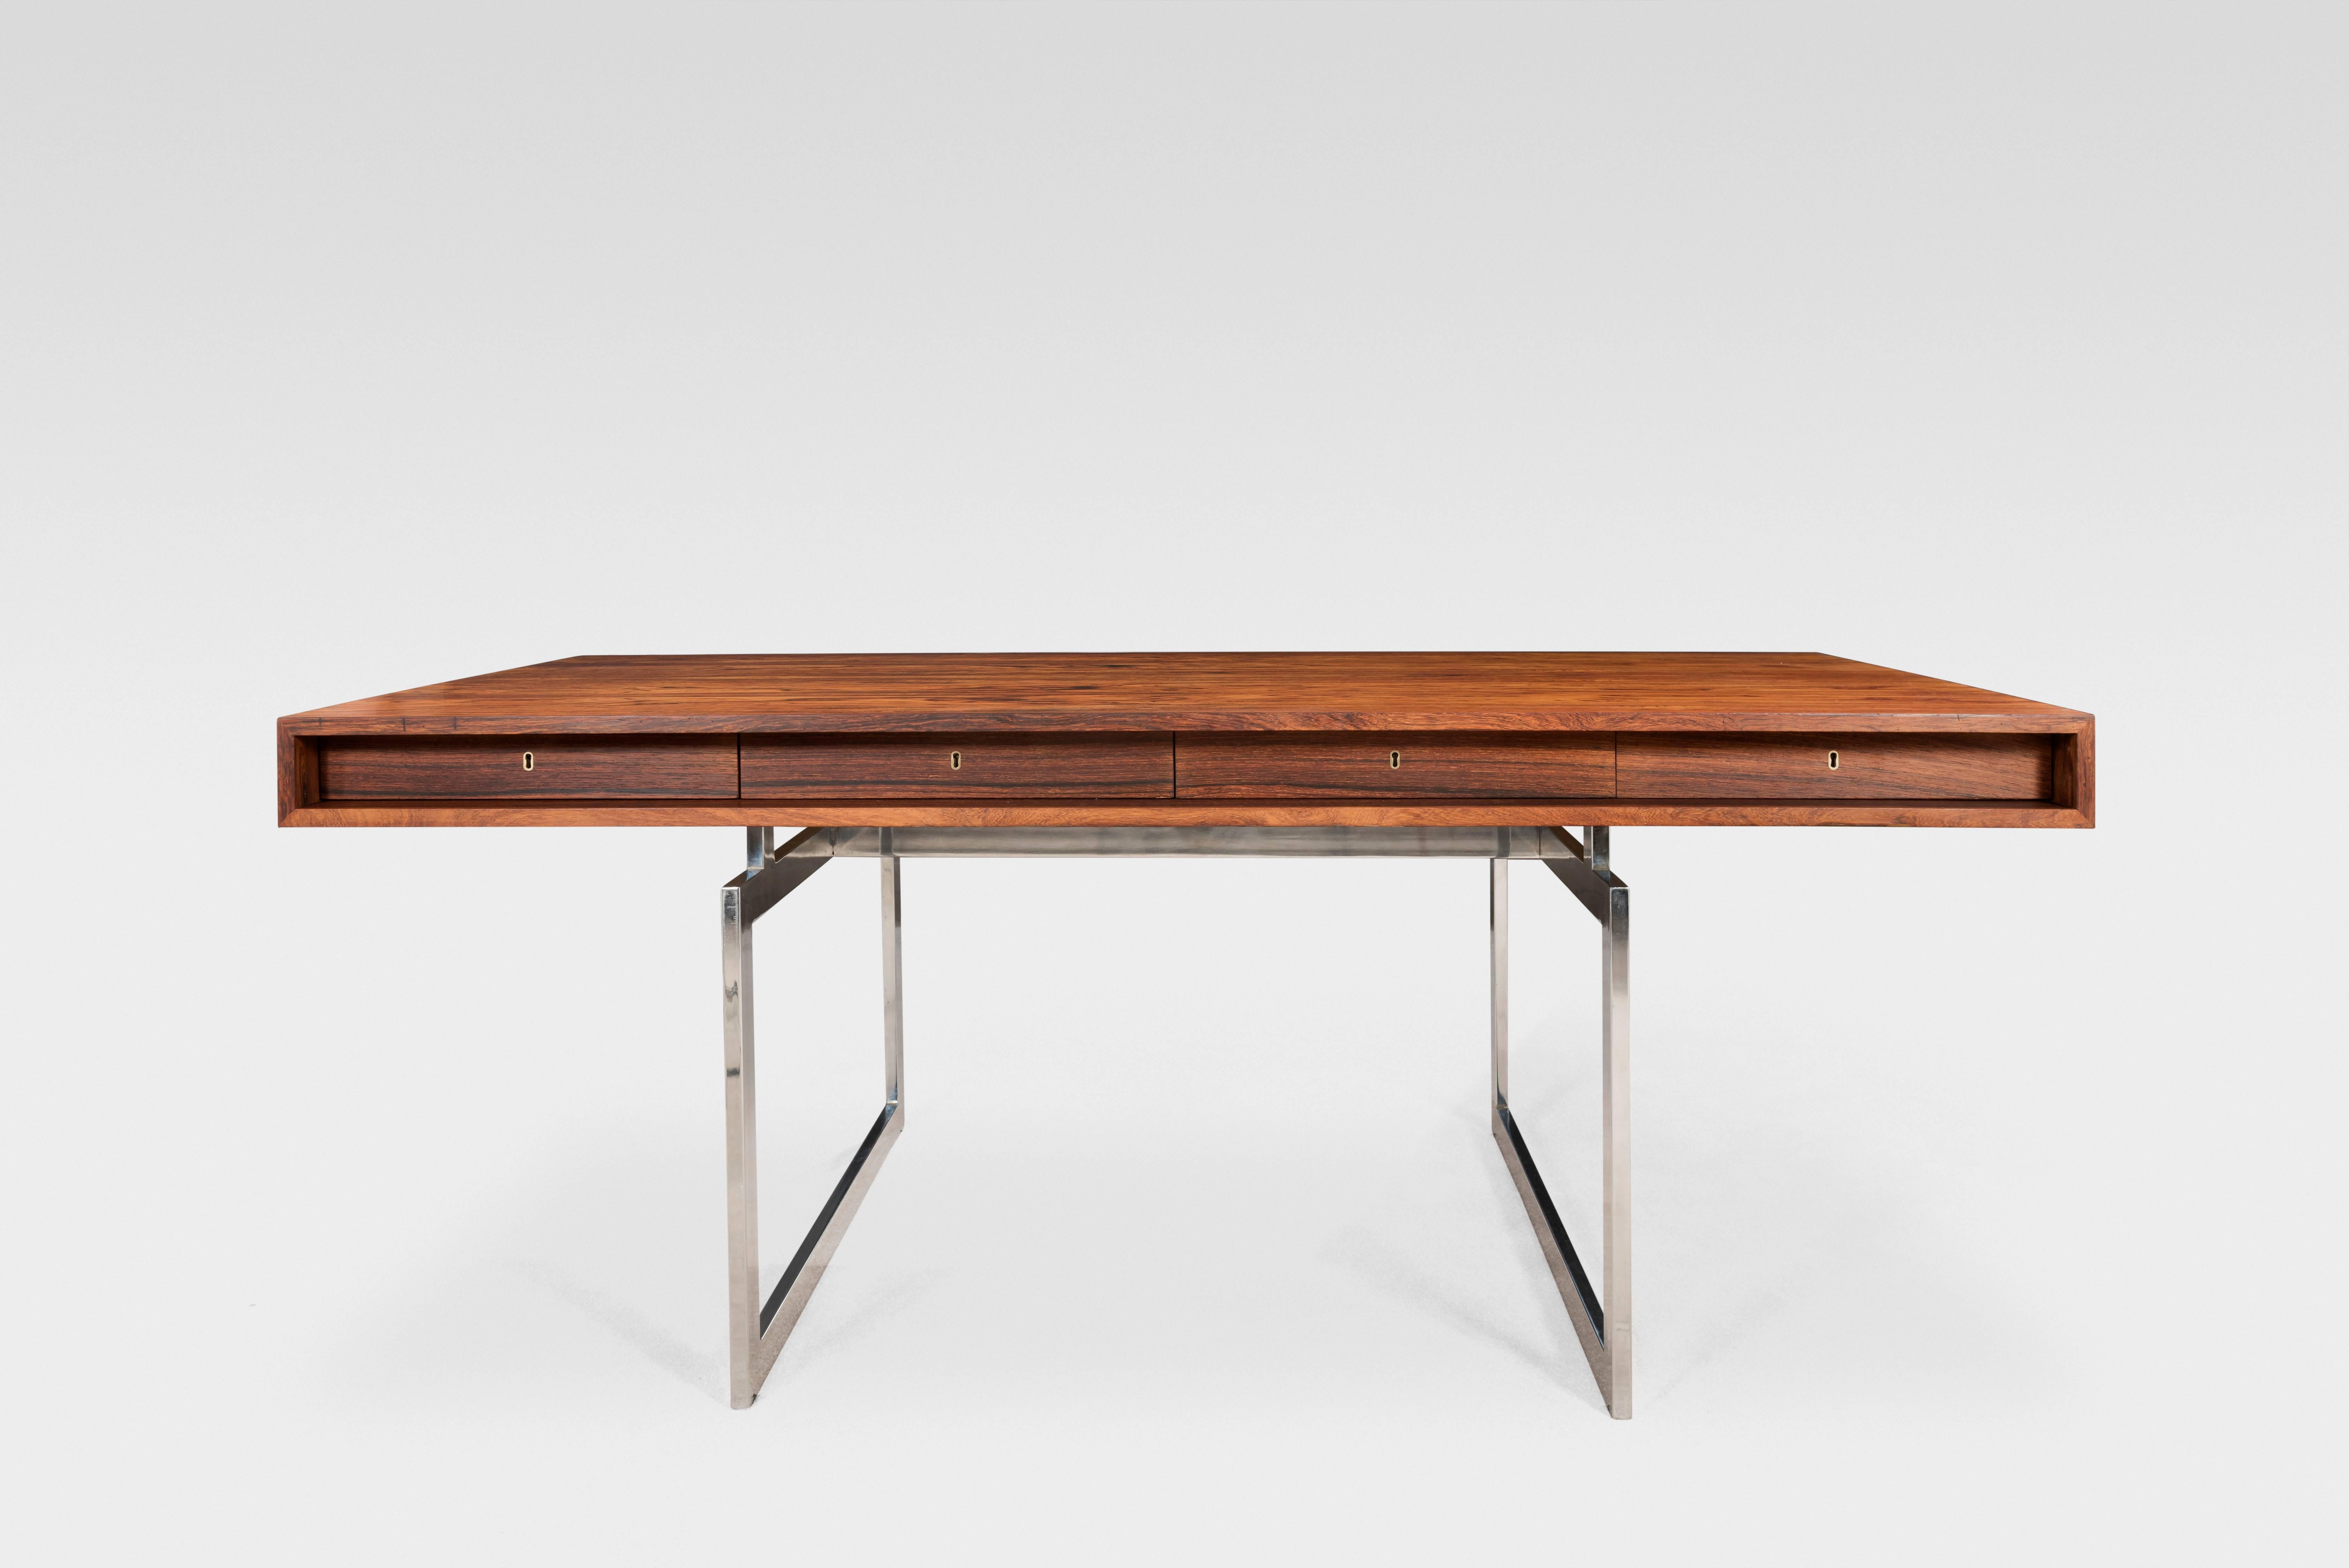 Bodil Kjær (born in 1932)
President Desk 
Manufactured by E. Pedersen & Søn, Rødovre, 1959
Rio rosewood and nickel-plated steel blade

This iconic desk appeared in 3 James Bond movies, hence its nickname.

